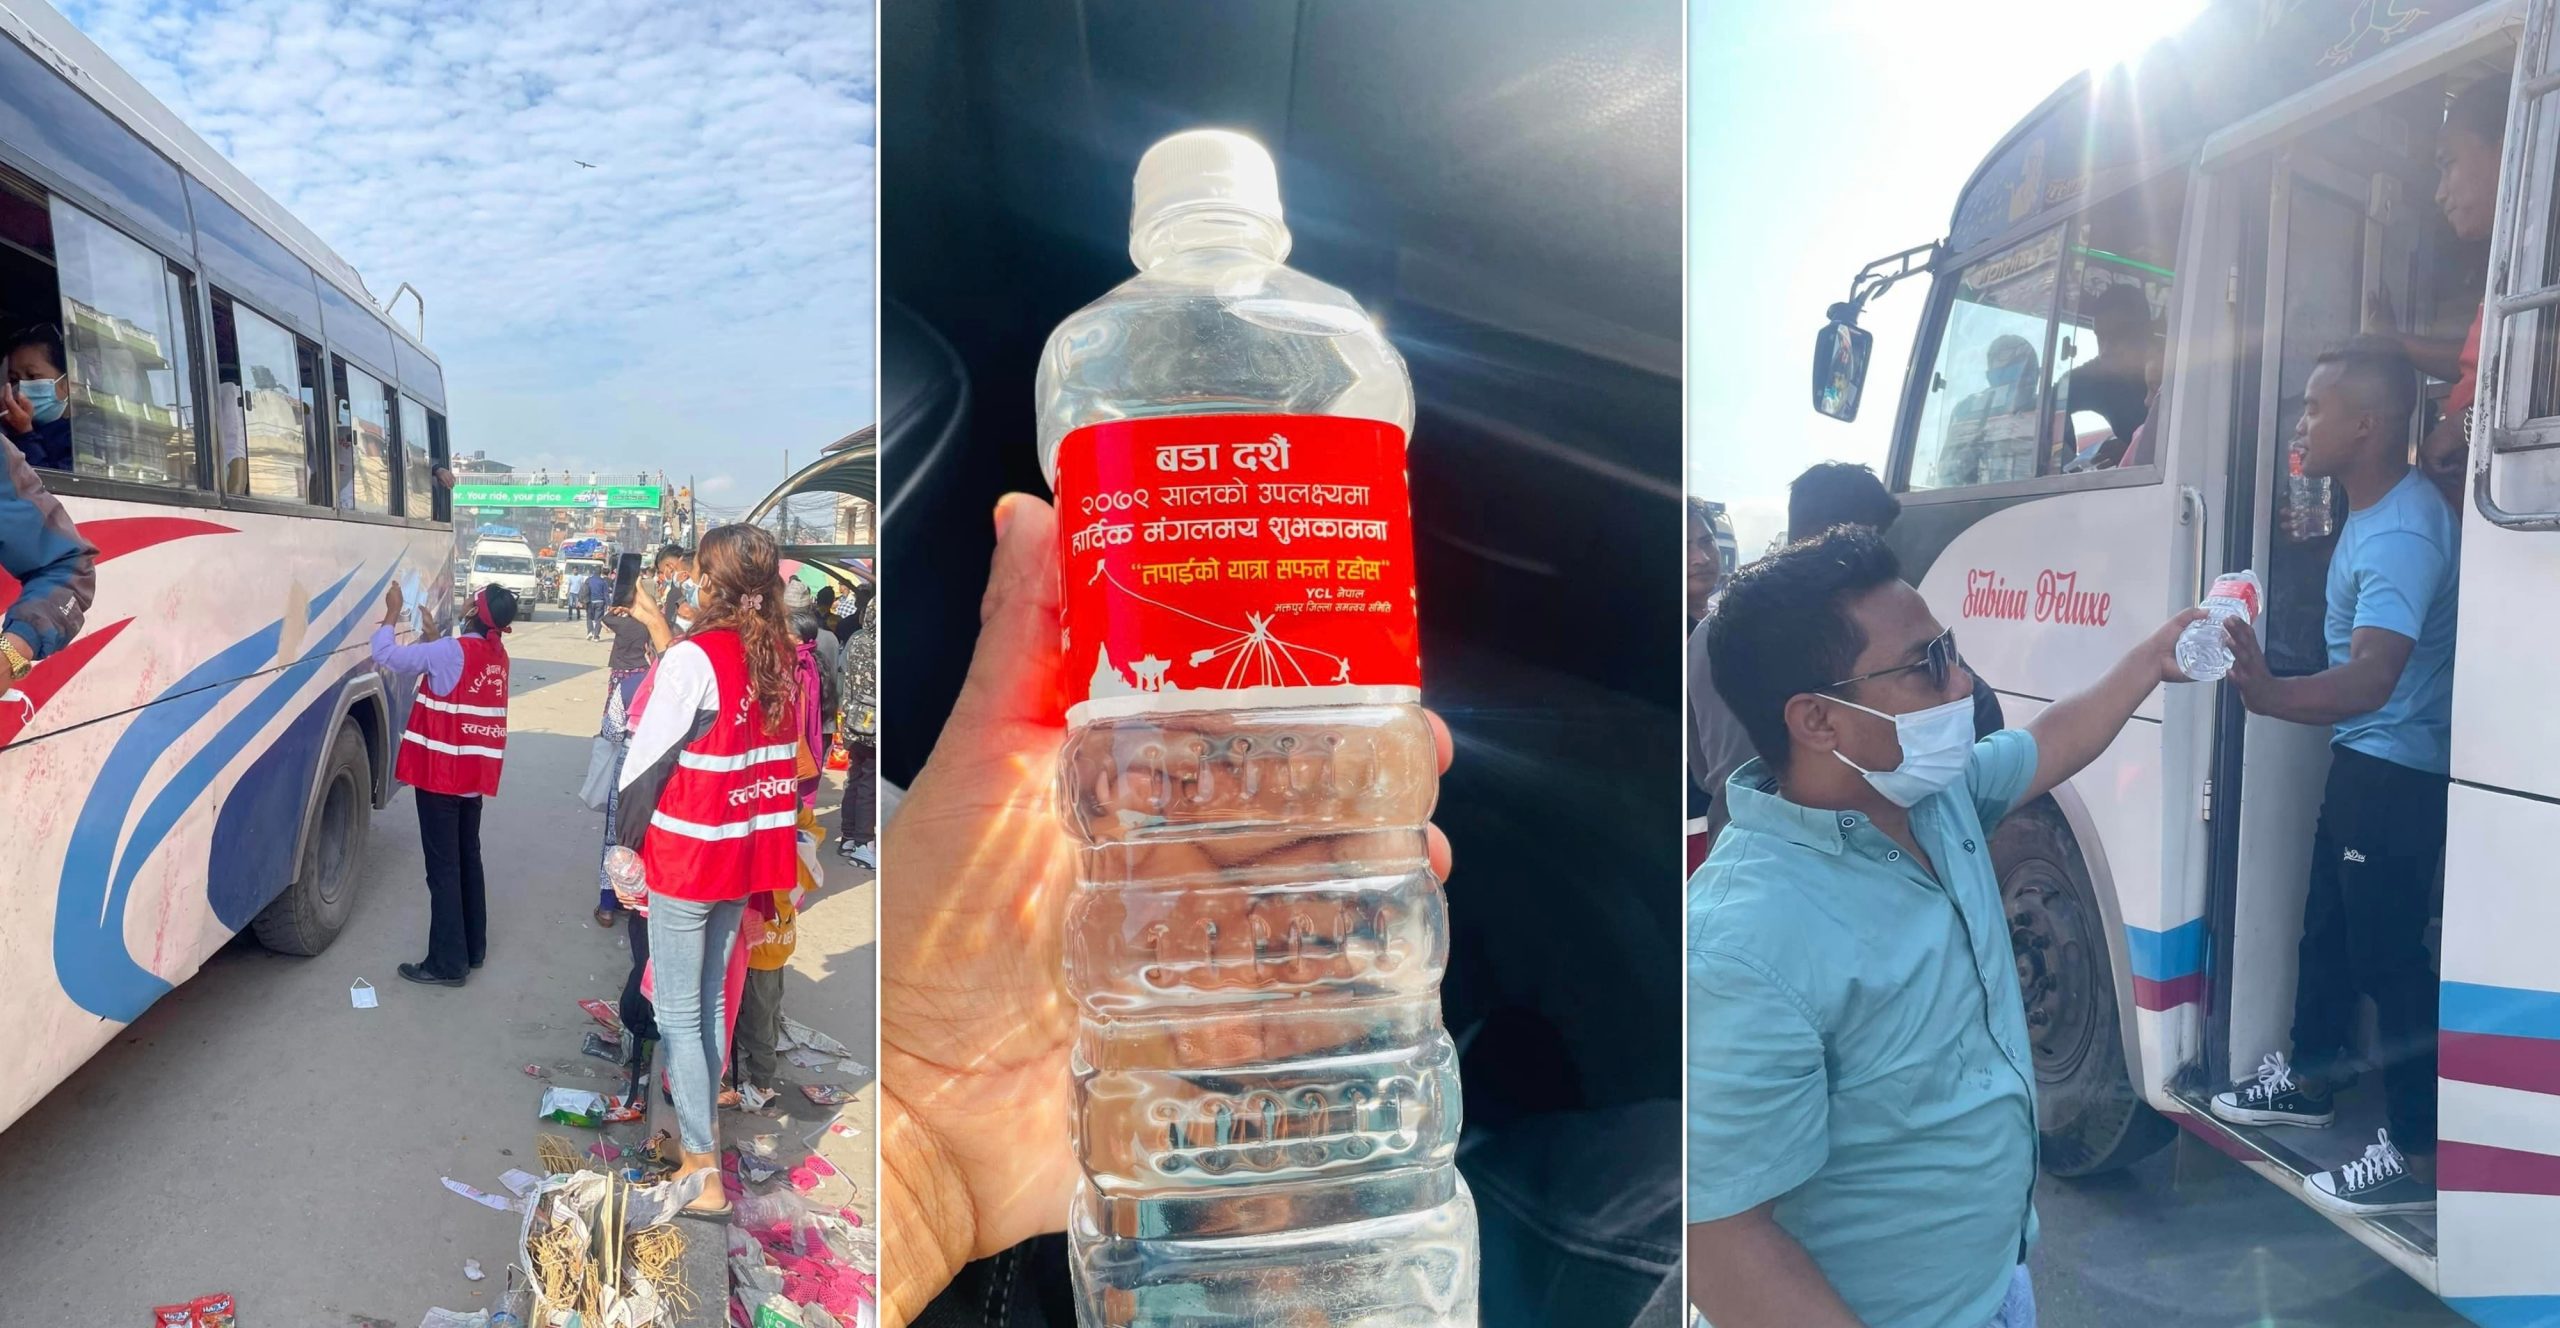 YCL provides masks and water to passengers heading home on Dashain